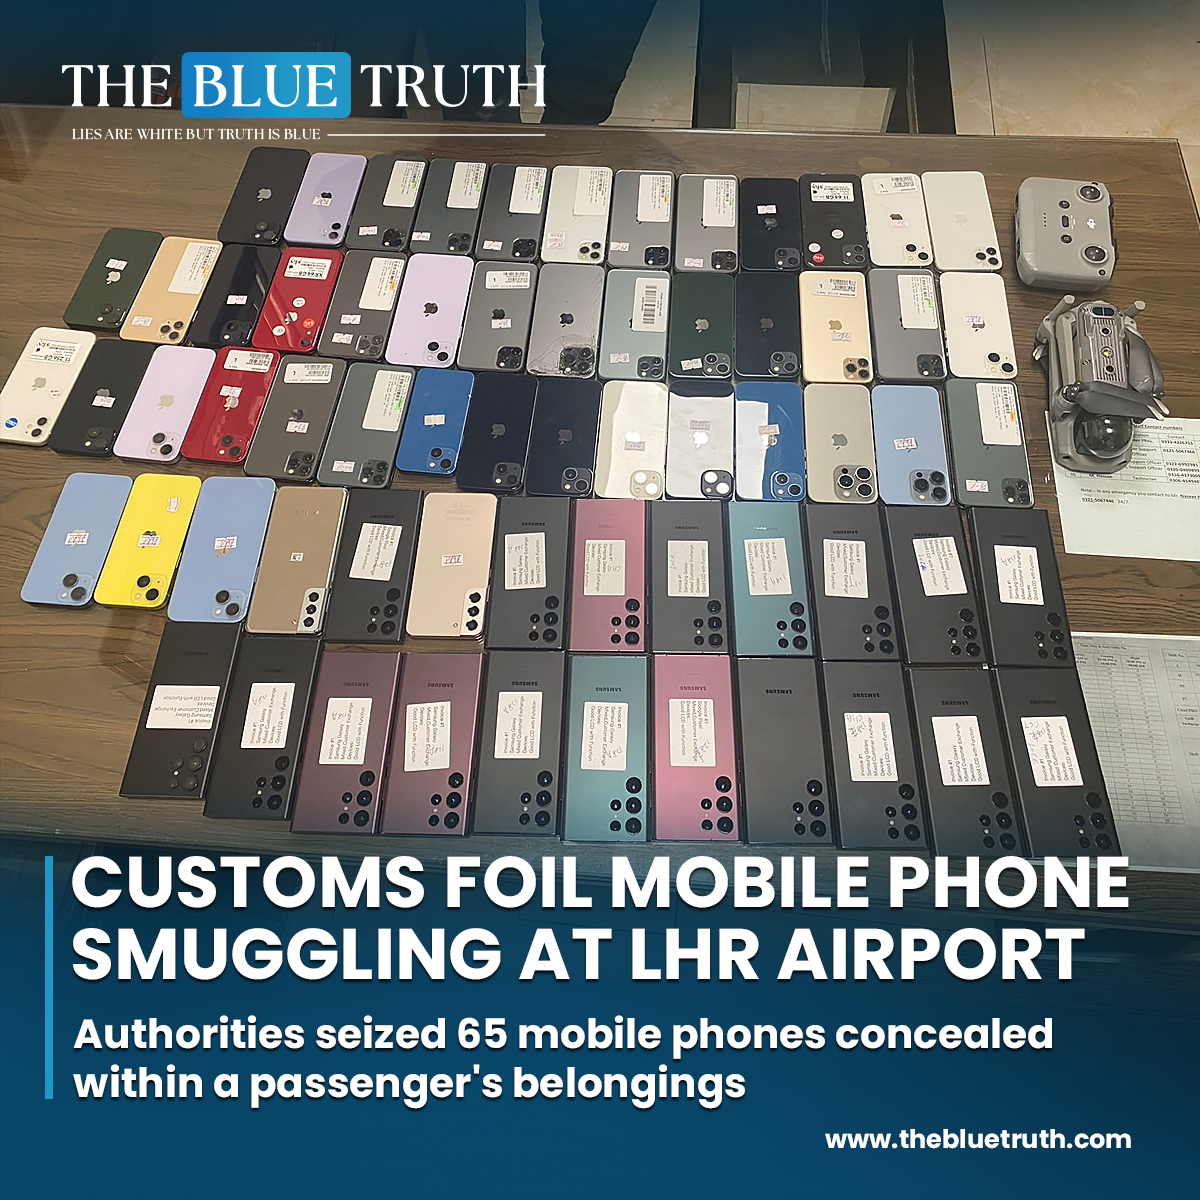 Customs foil mobile phone smuggling at LHR airport.
Authorities seized 65 mobile phones concealed within a passenger's belongings.
#CustomsSuccess #SmugglingPrevention #MobilePhoneControl #AirportSecurity
#CustomsEnforcement #AntiSmuggling #tbt #thebluetruth